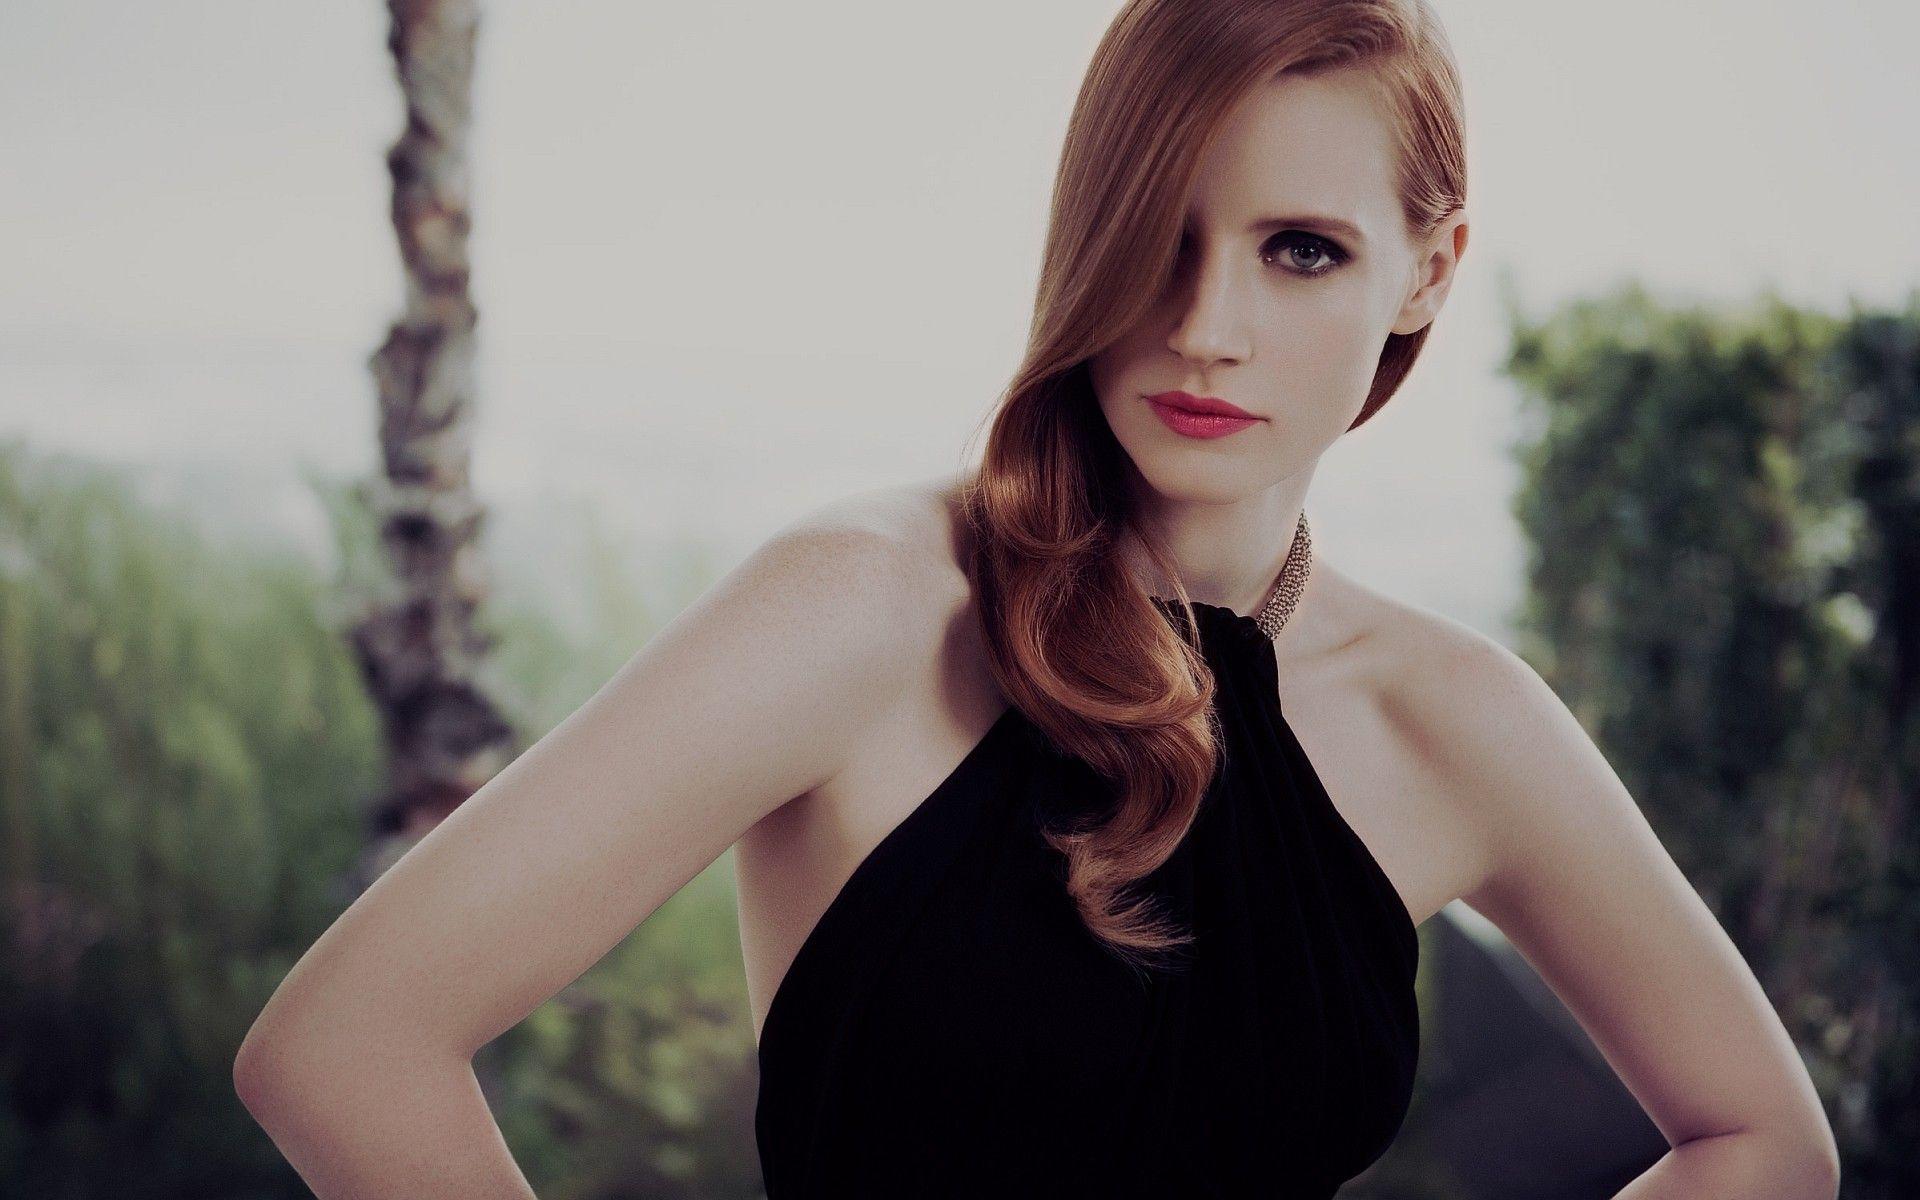 Jessica Chastain Beautiful Portrait Wallpapers